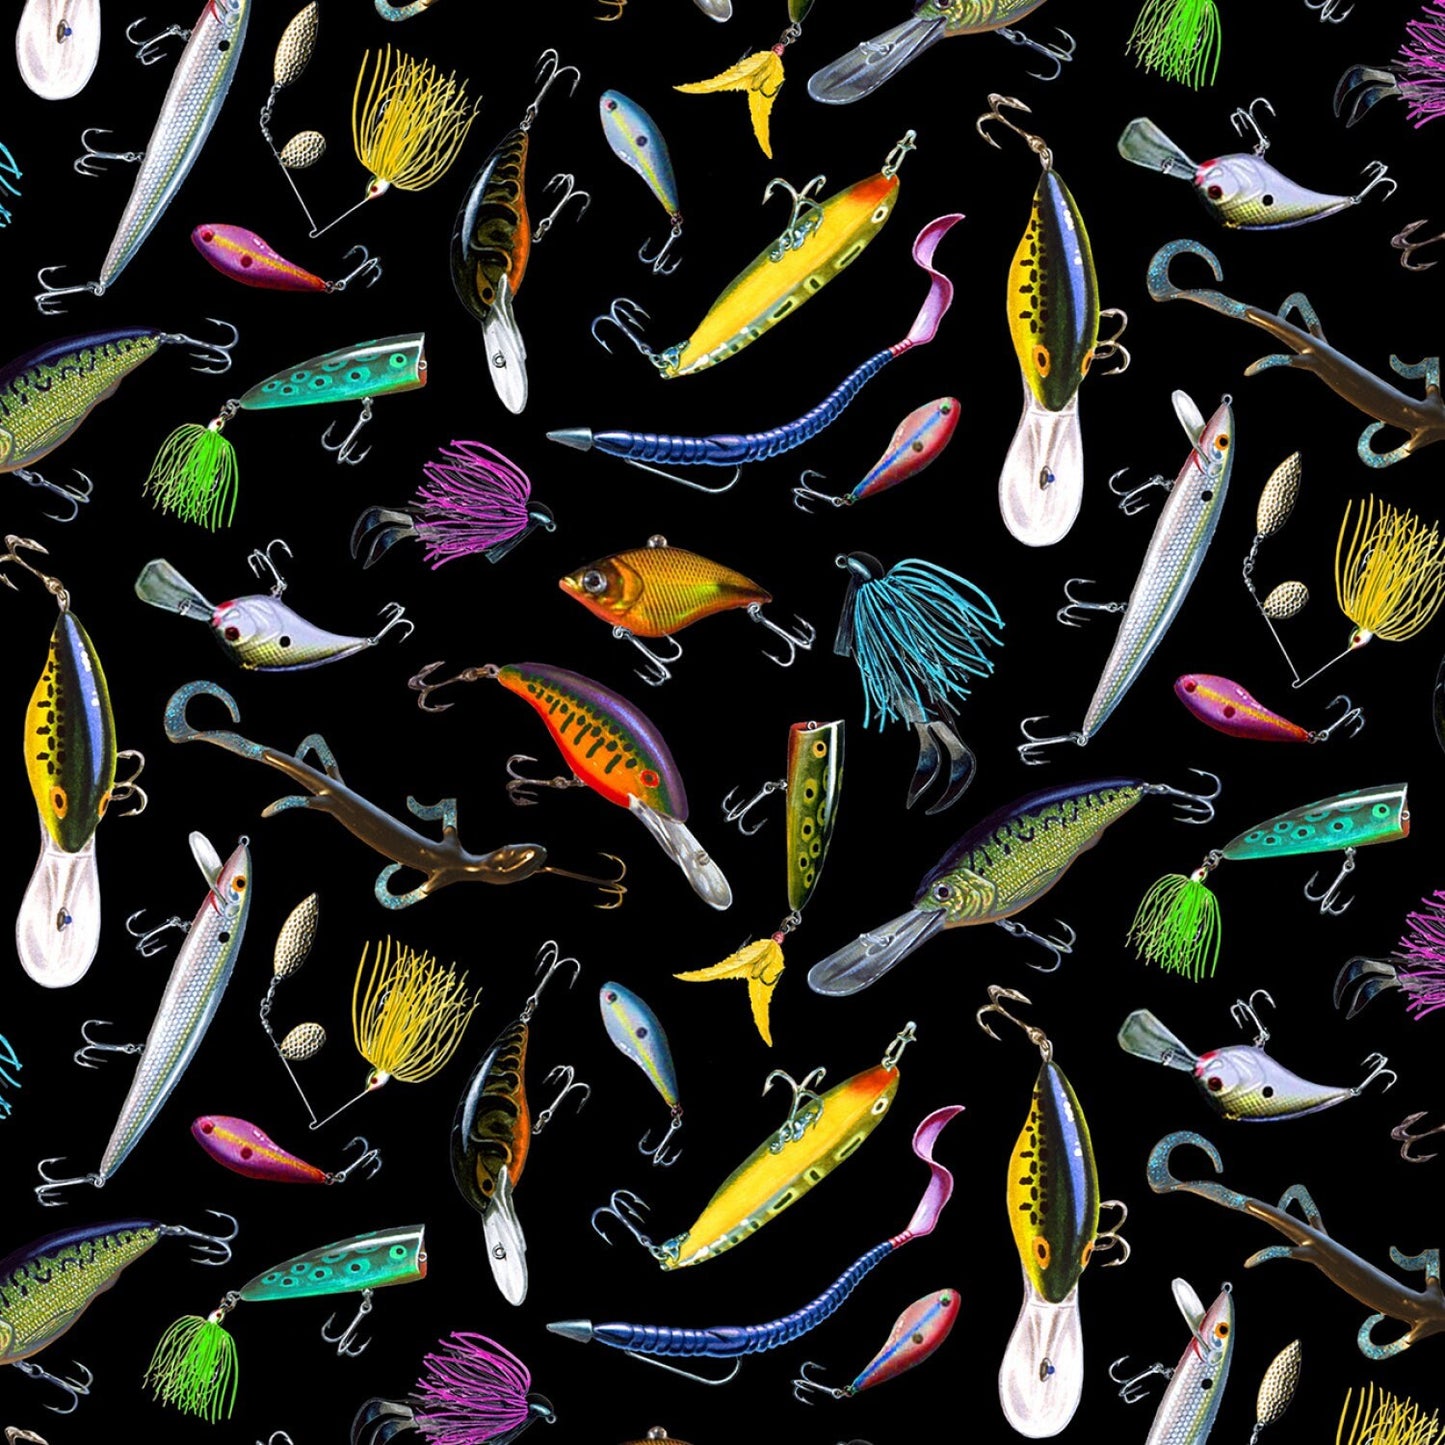 Fishing Lures - Tight Lines collection by Elizabeth's Studio - 100% Cotton Fabric - Hard lure fishing theme fishing material -SHIPS NEXT DAY